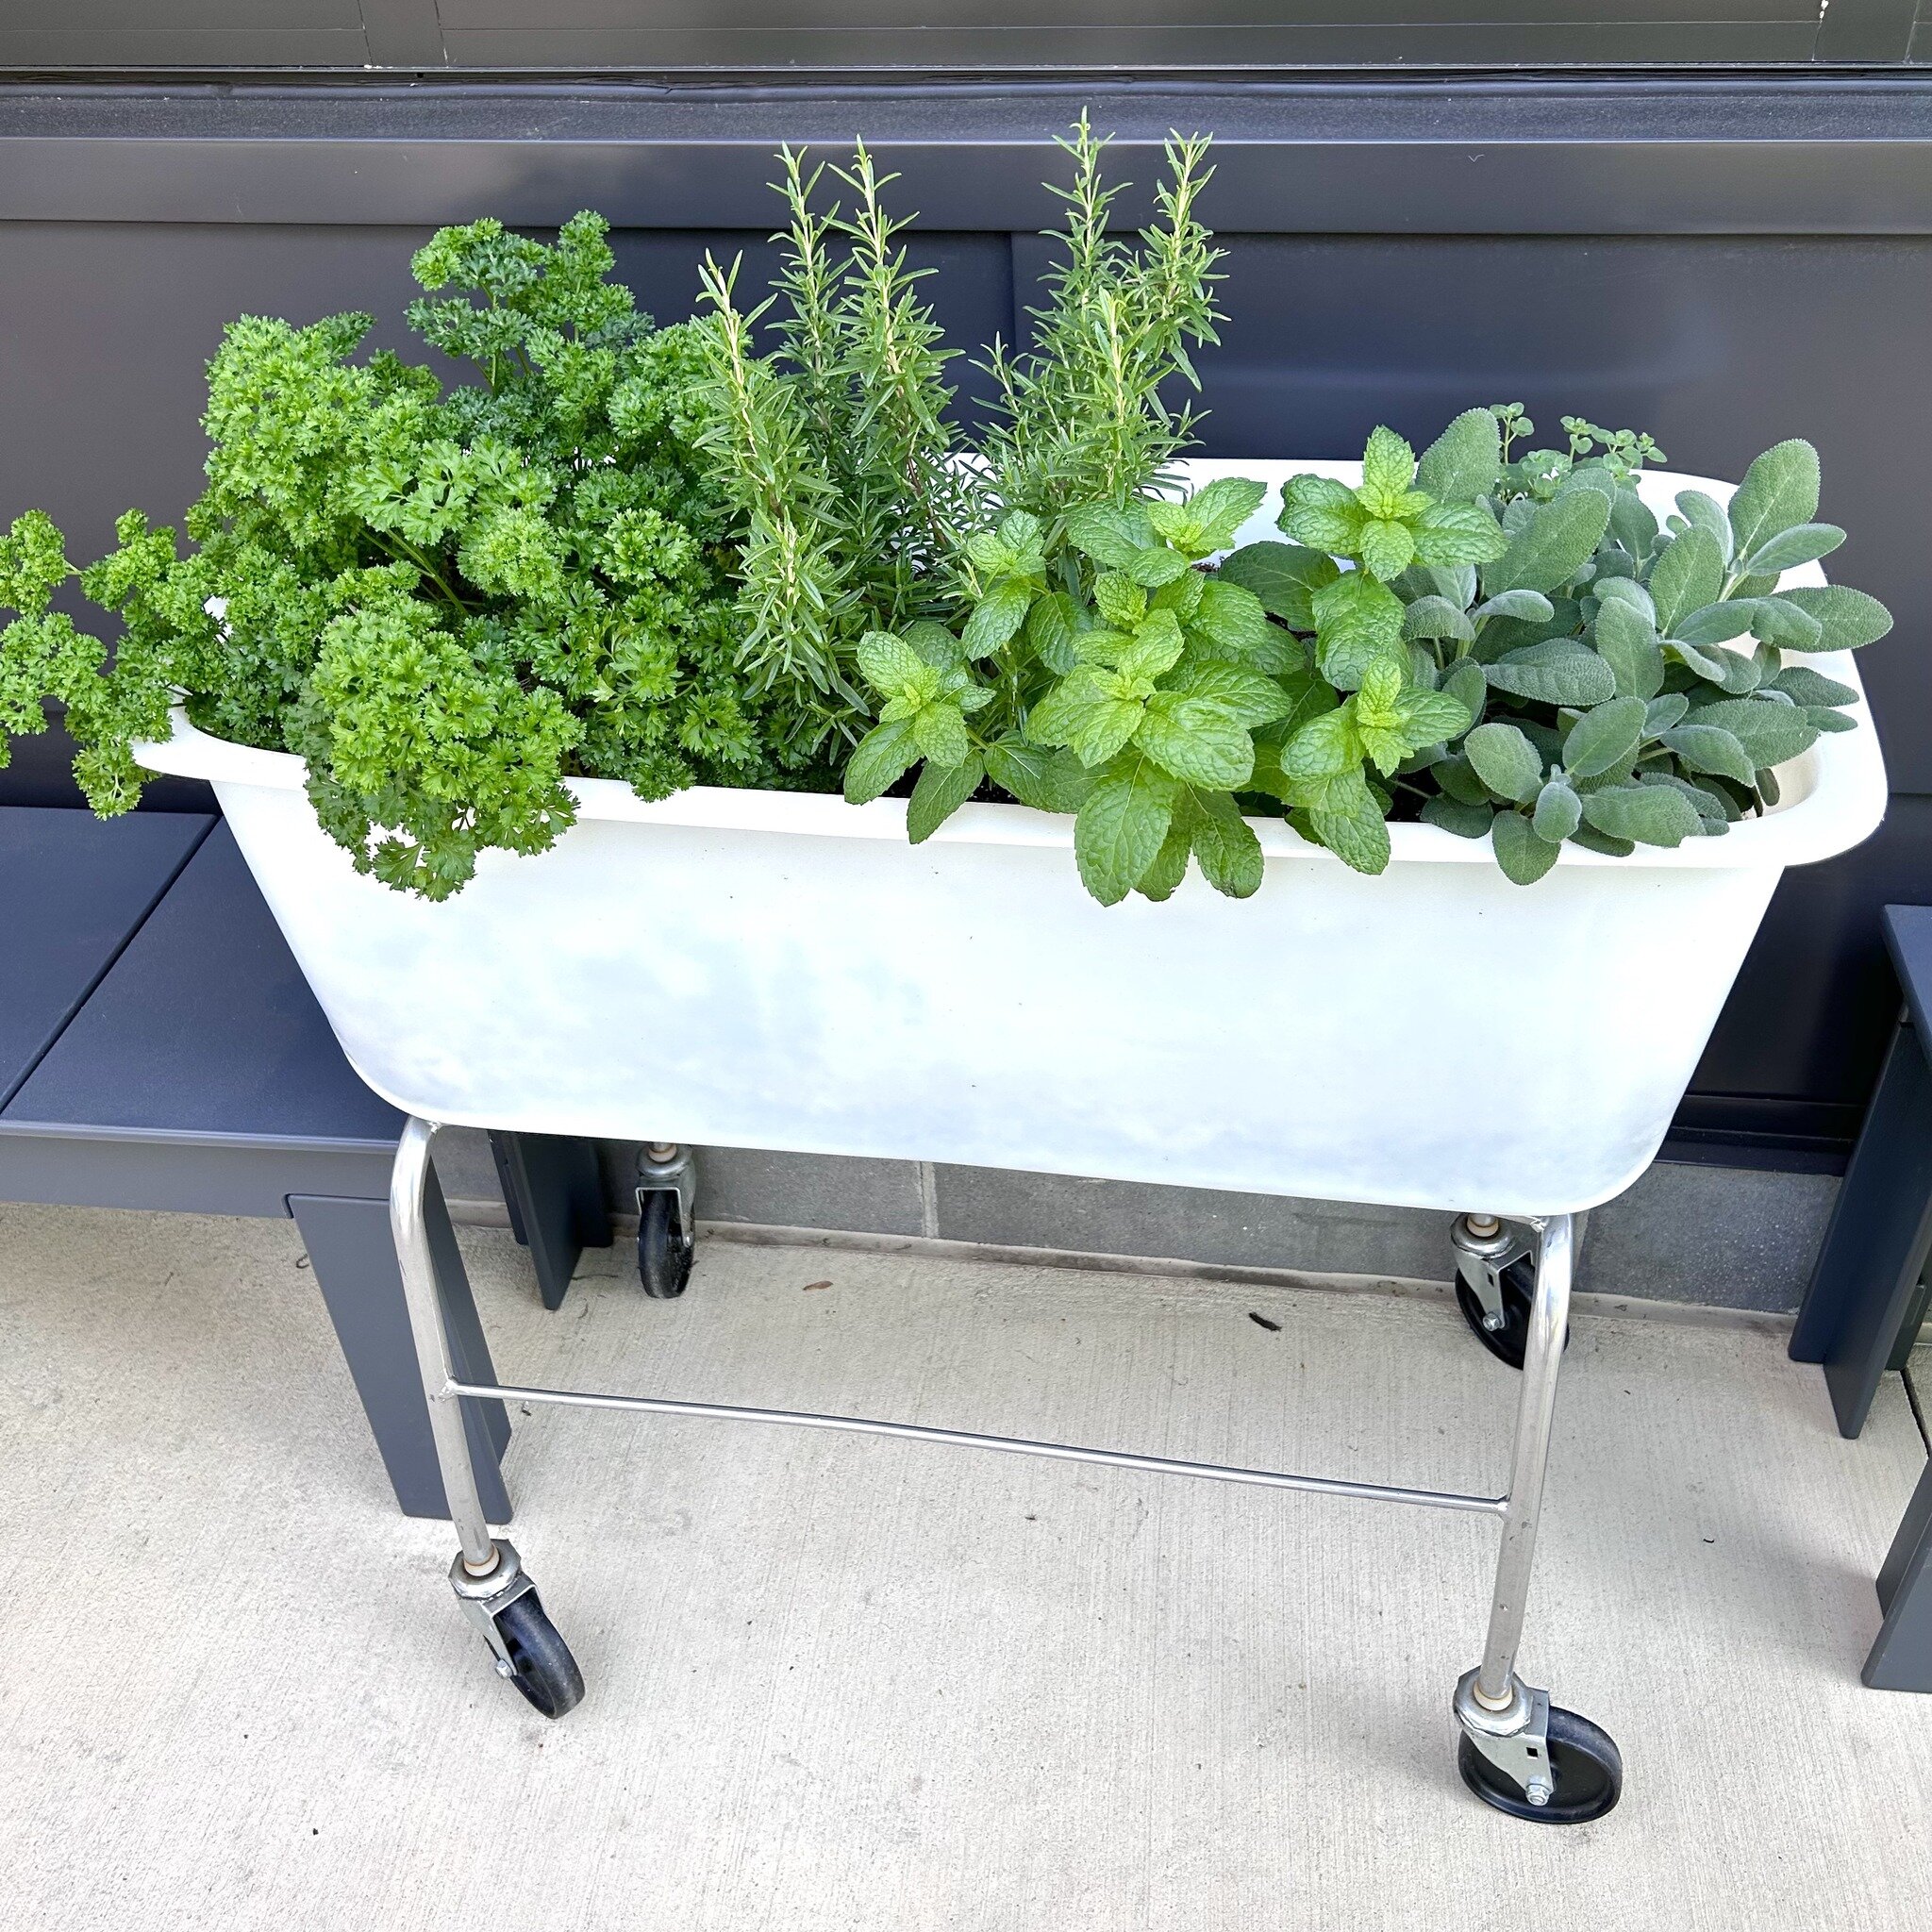 Fun herb planters seen at True Food Kitchen. #DIY with the classic parsley, sage, rosemary, and thyme as well as mint and oregano.  The trick with herbs is to give them great drainage and only half the amount of organic fertilizer you would give your